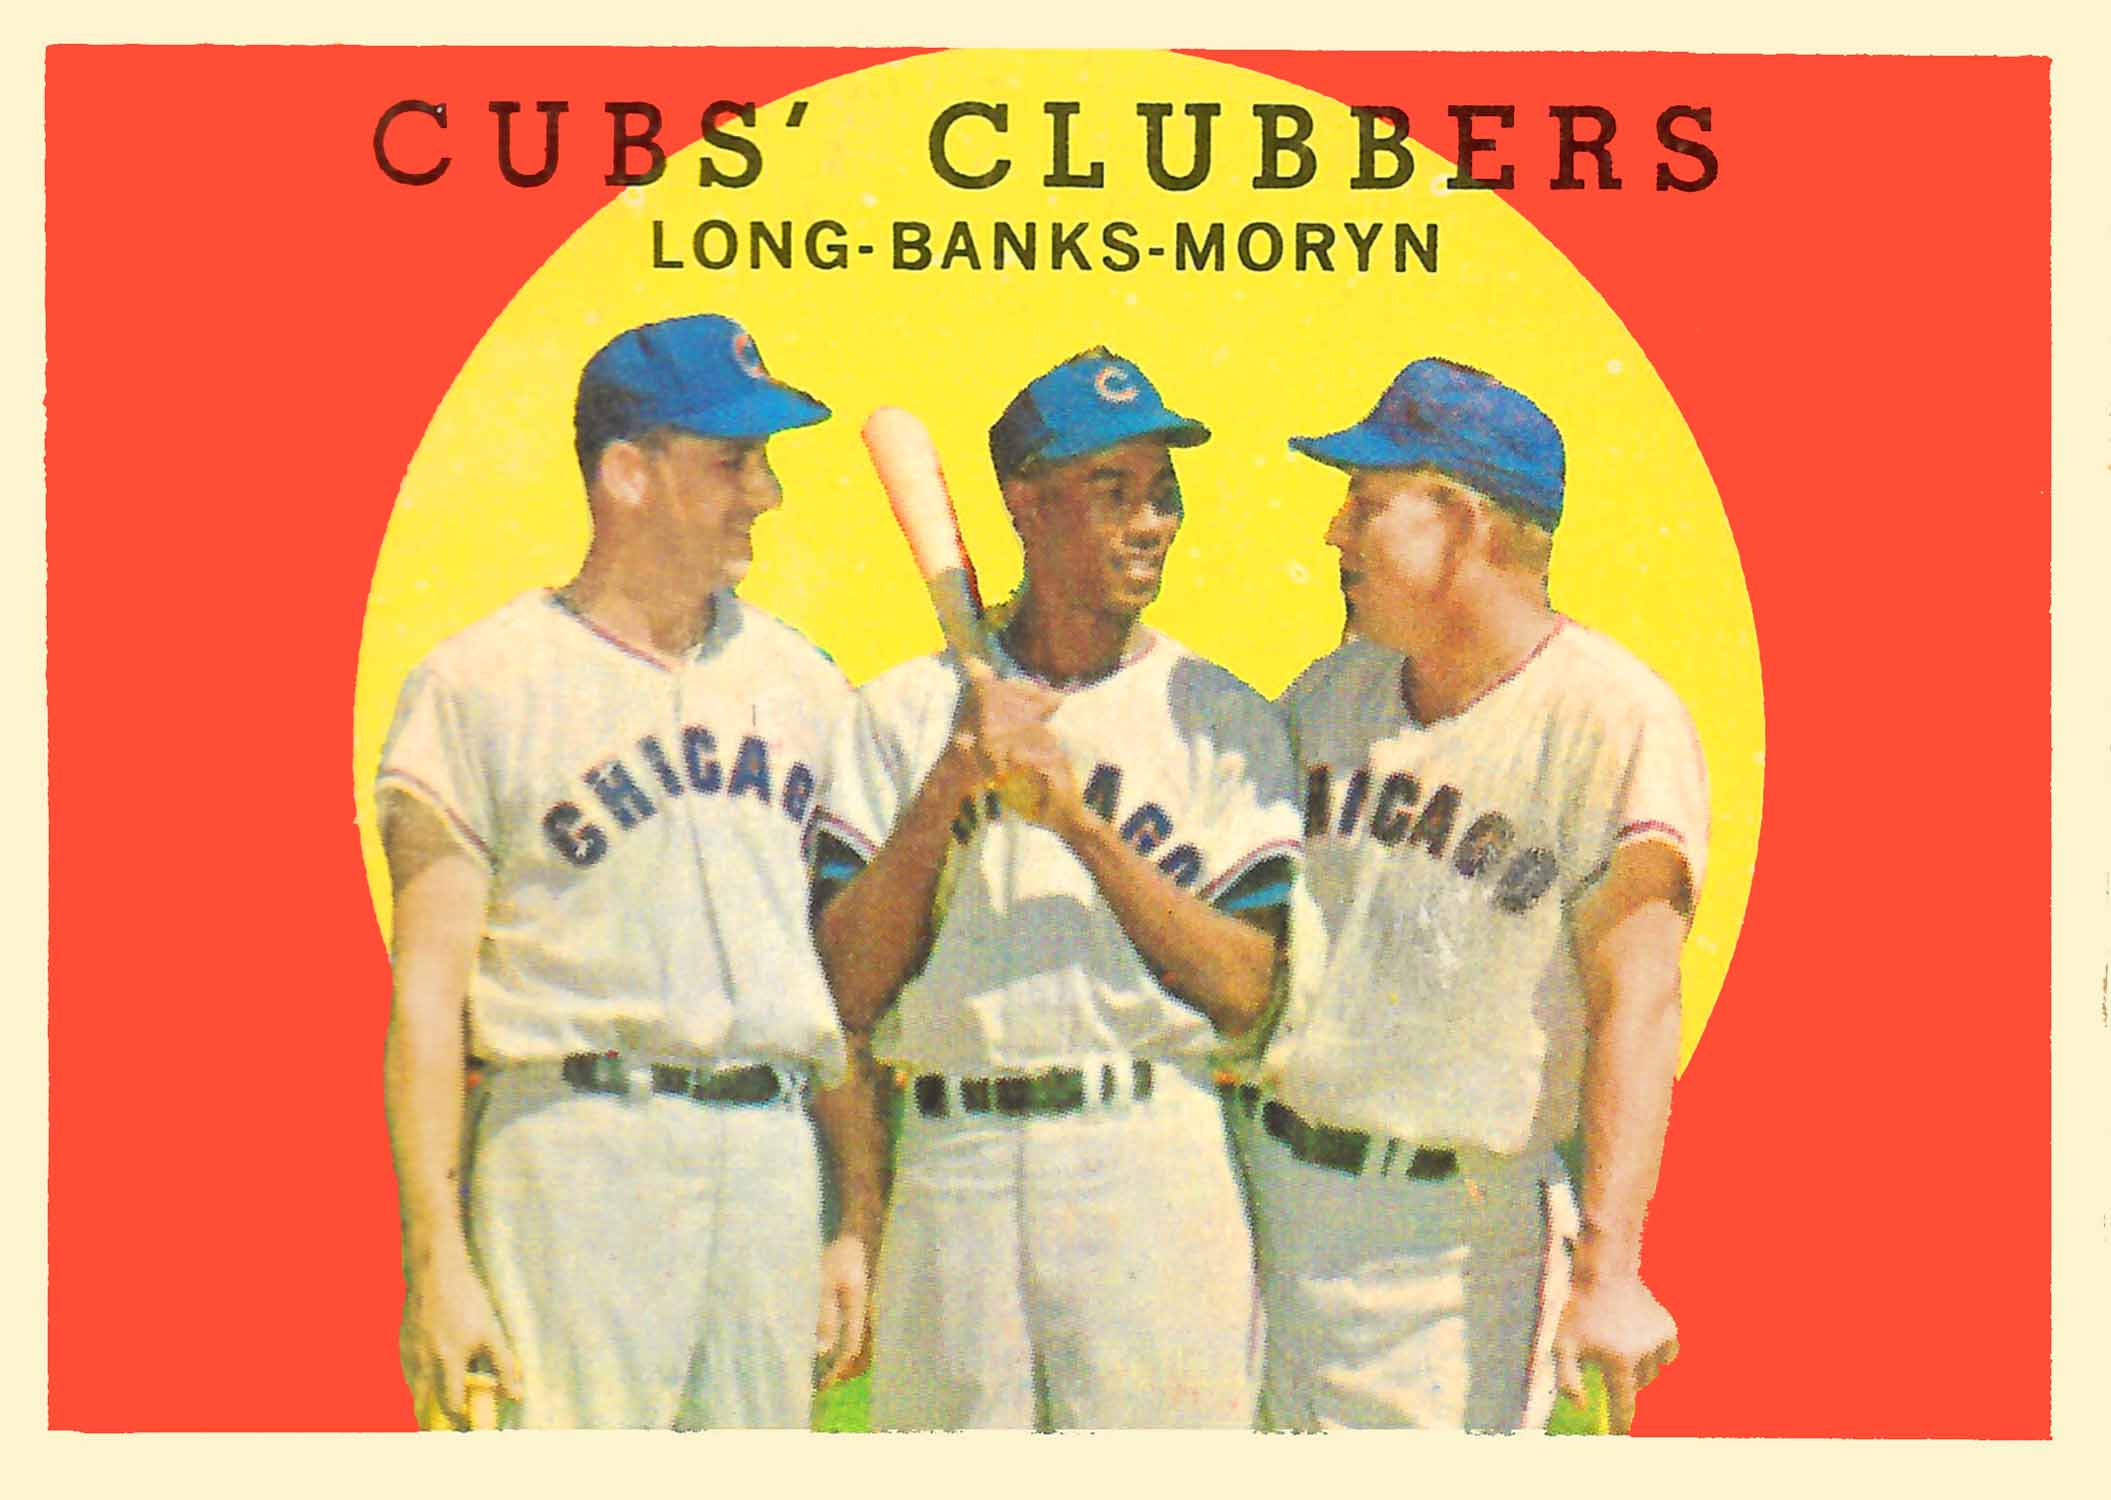 1959 Topps Cubs Clubbers